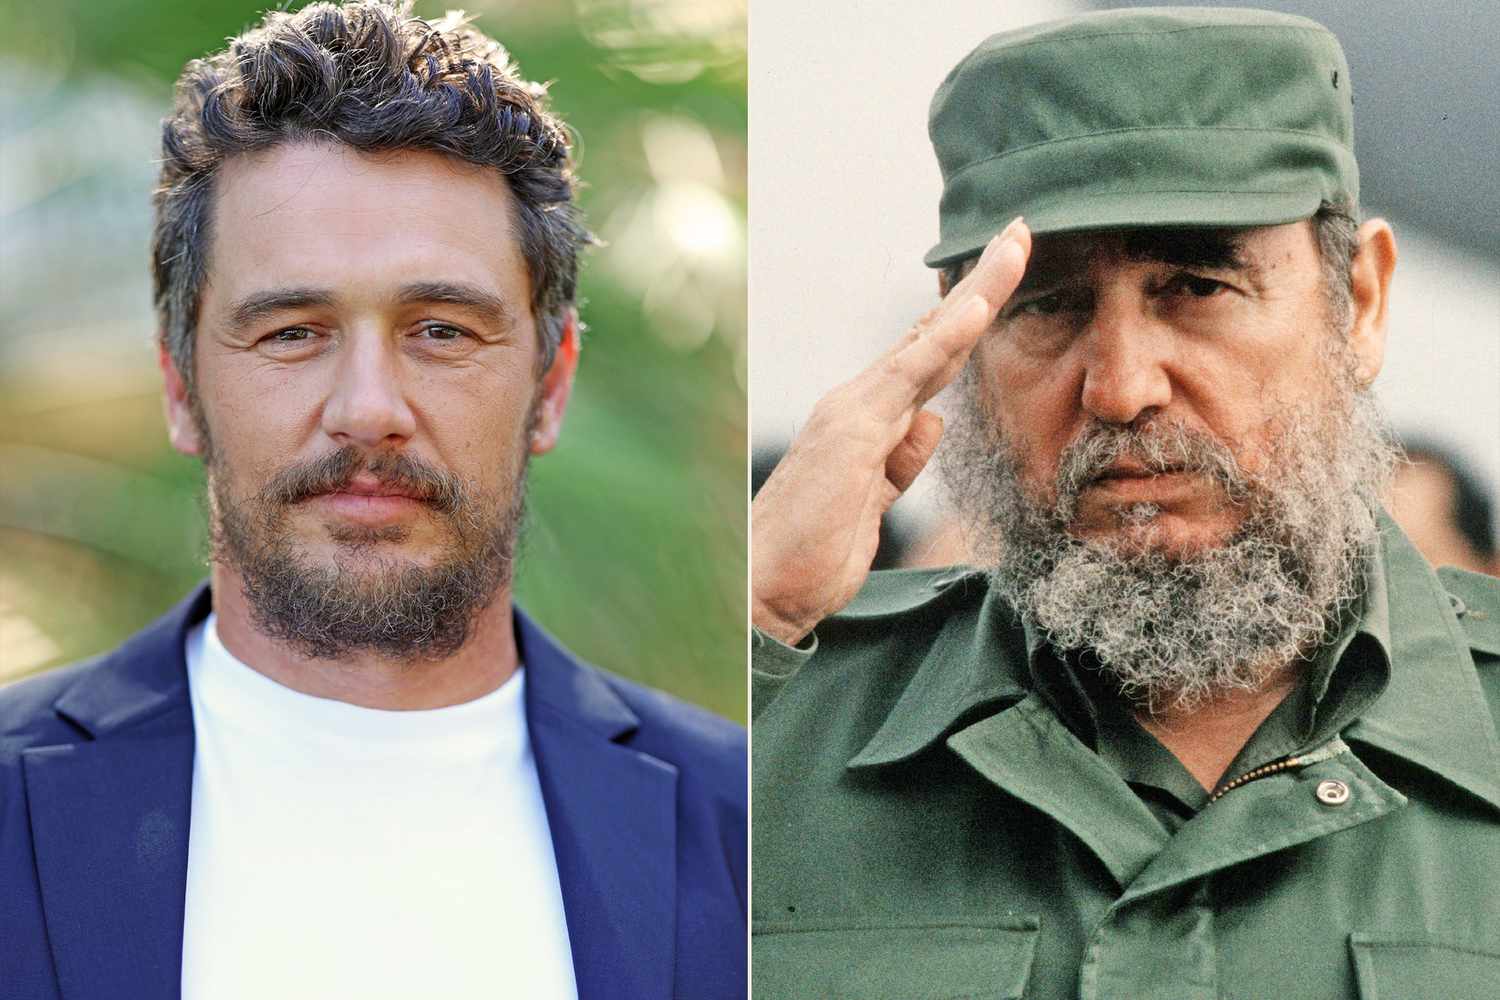 Fidel Castro's legacy continues through his family and representation in media.